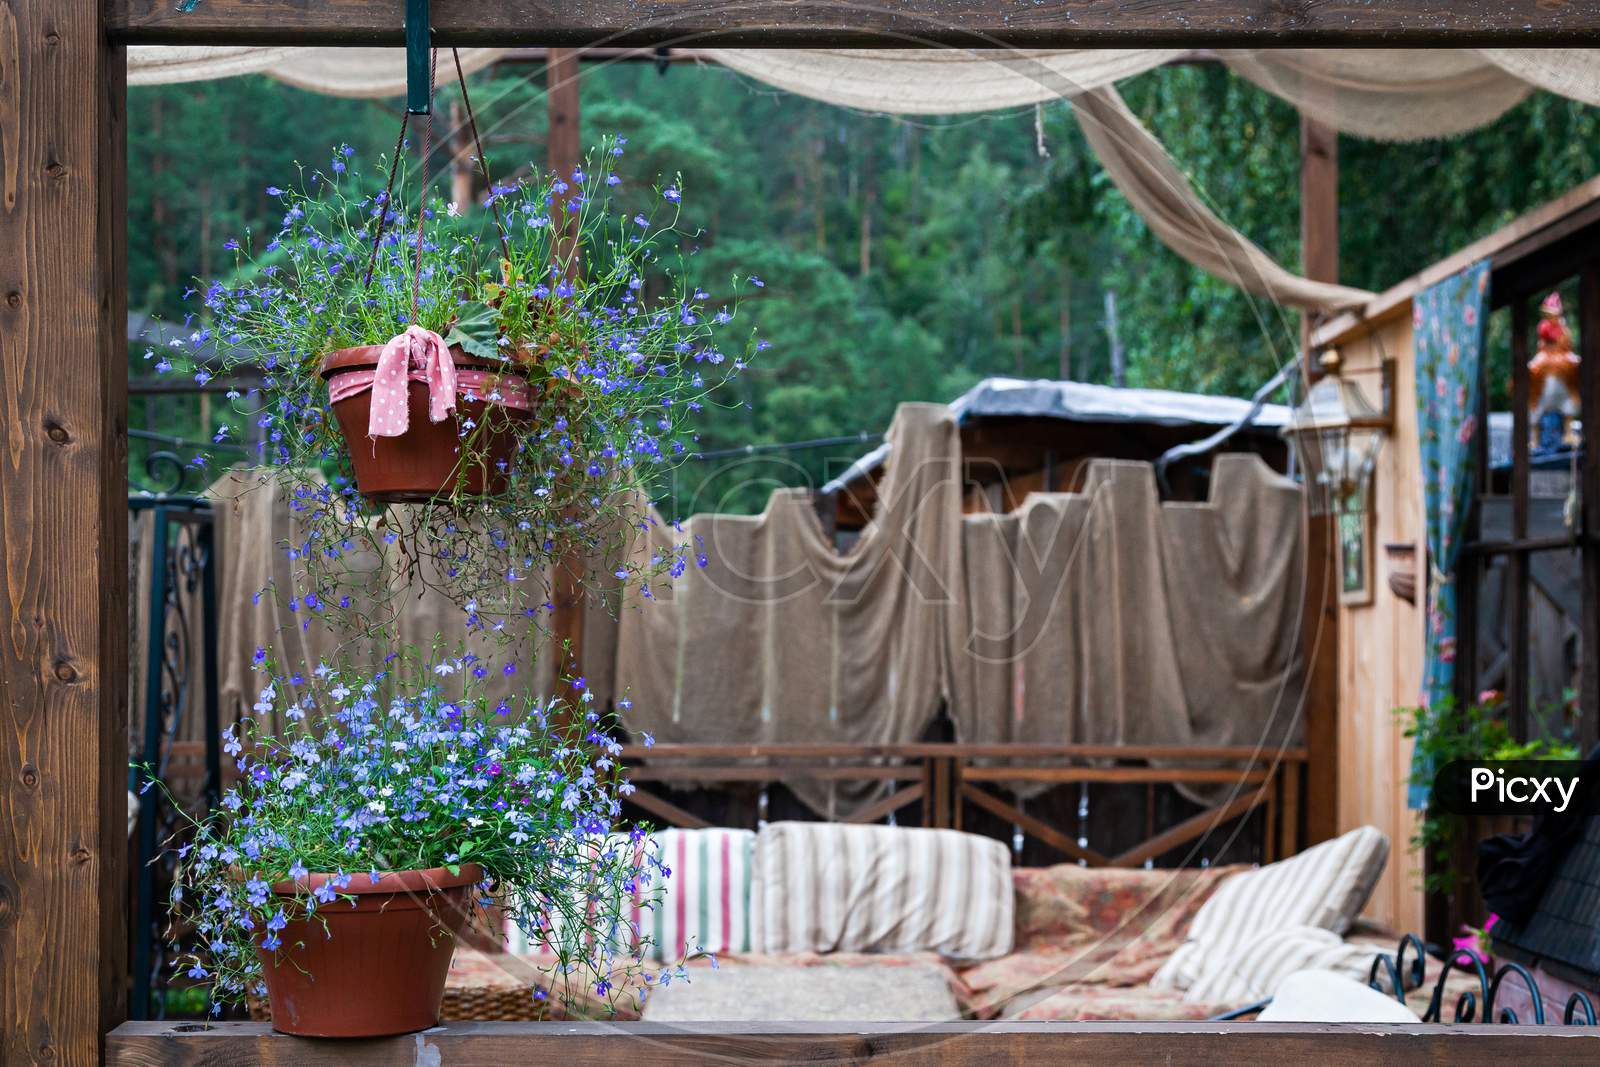 Beautiful Scenery Of The Rustic Veranda: Pots With Purple Flowers, A Lamp, Decoration With Various Fabrics And A Sofa